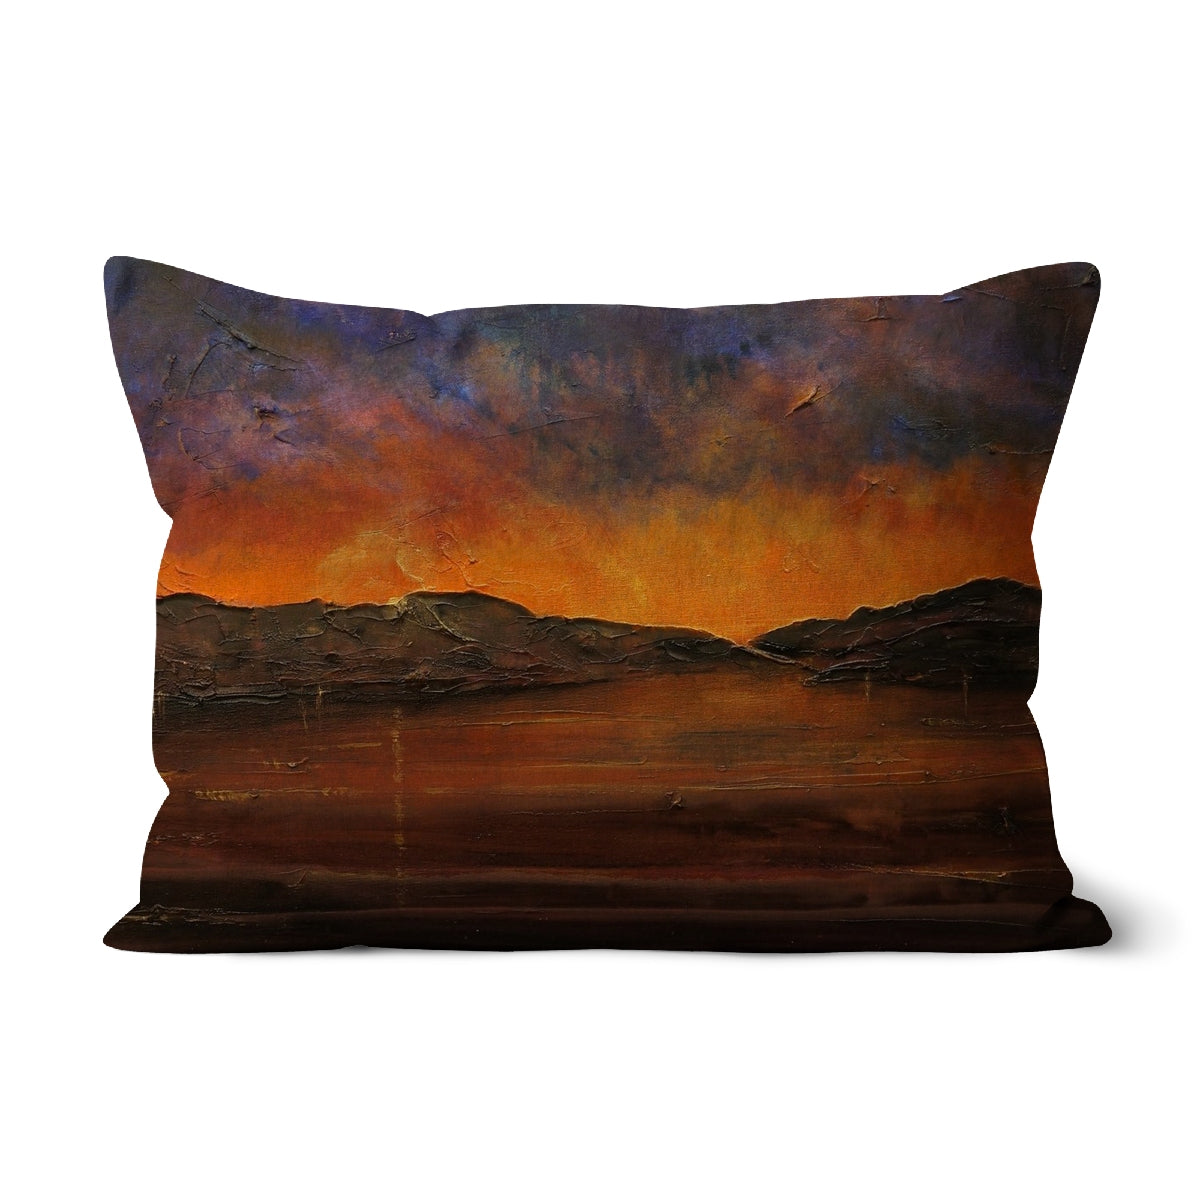 A Brooding Clyde Dusk Art Gifts Cushion-Cushions-River Clyde Art Gallery-Faux Suede-19"x13"-Paintings, Prints, Homeware, Art Gifts From Scotland By Scottish Artist Kevin Hunter